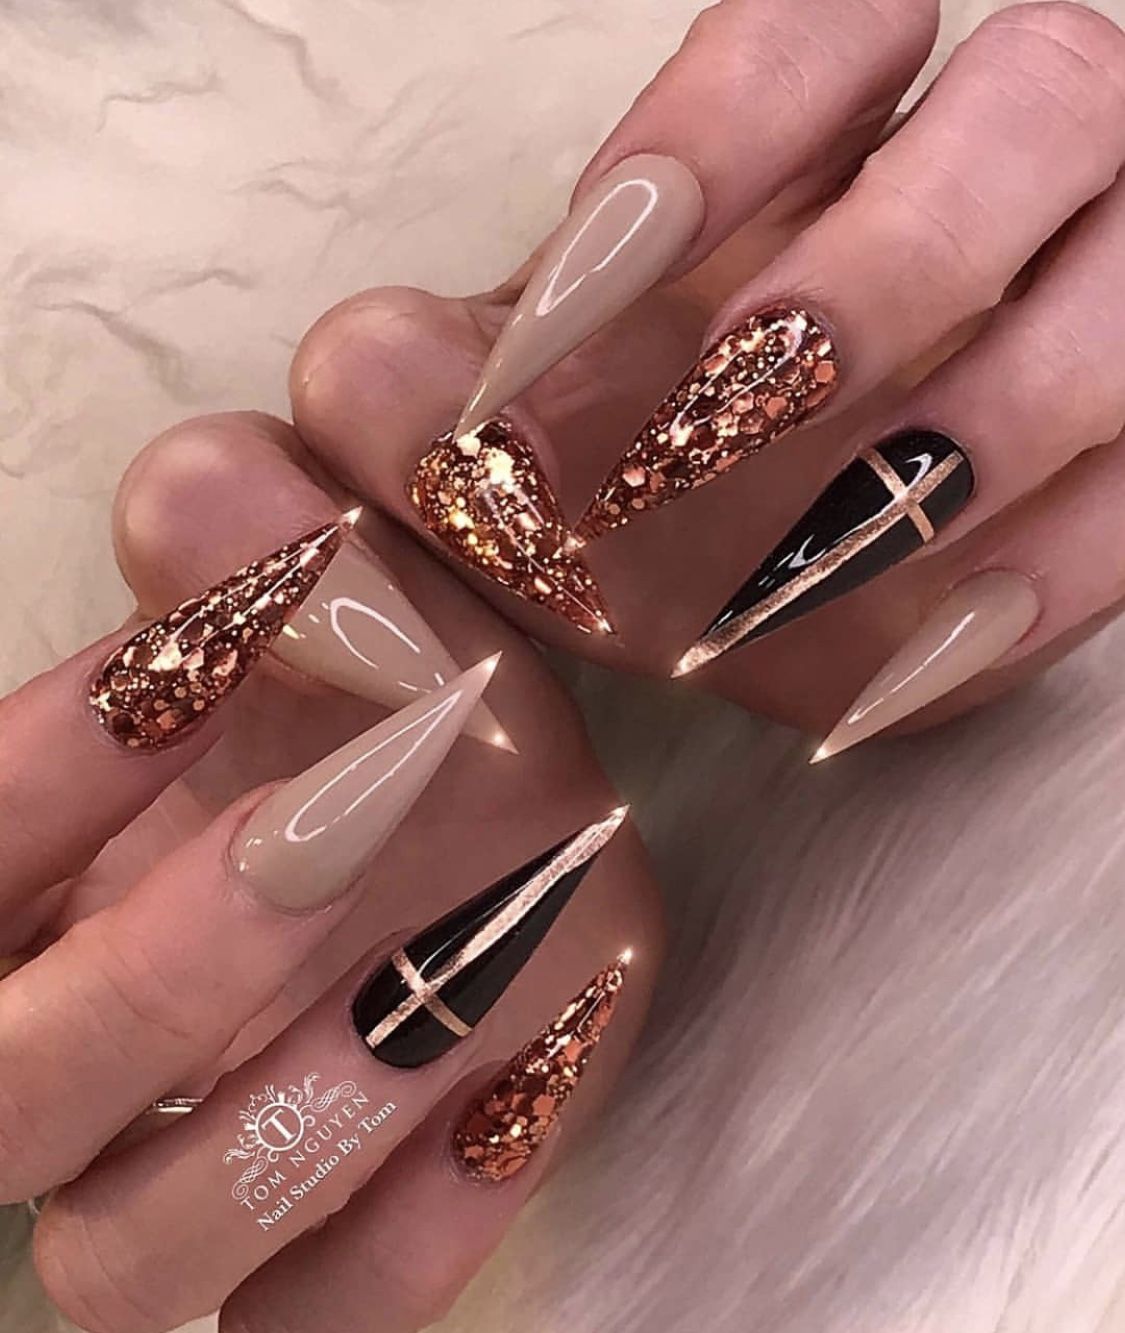 Pin By P Lucinkaaa On Nails In 2020 With Images Gelove Nehty Zlate Nehty Umele Nehty